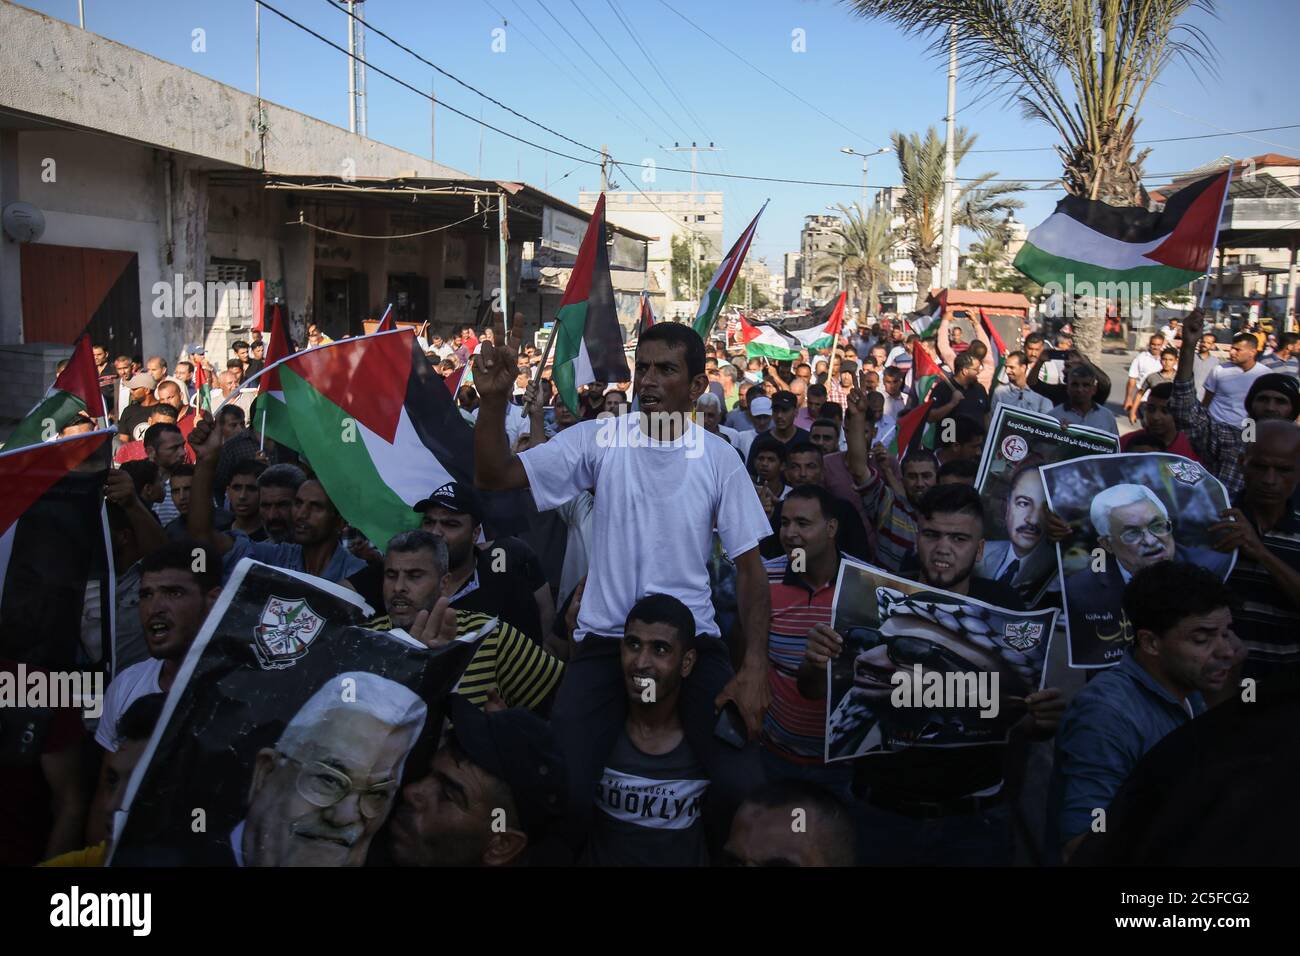 Demonstrators chant slogans while carrying placards of the late Palestinian President Yasser Arafat during a demonstration against Israeli plans to annex parts of the occupied West Bank in the central Gaza Strip. Stock Photo